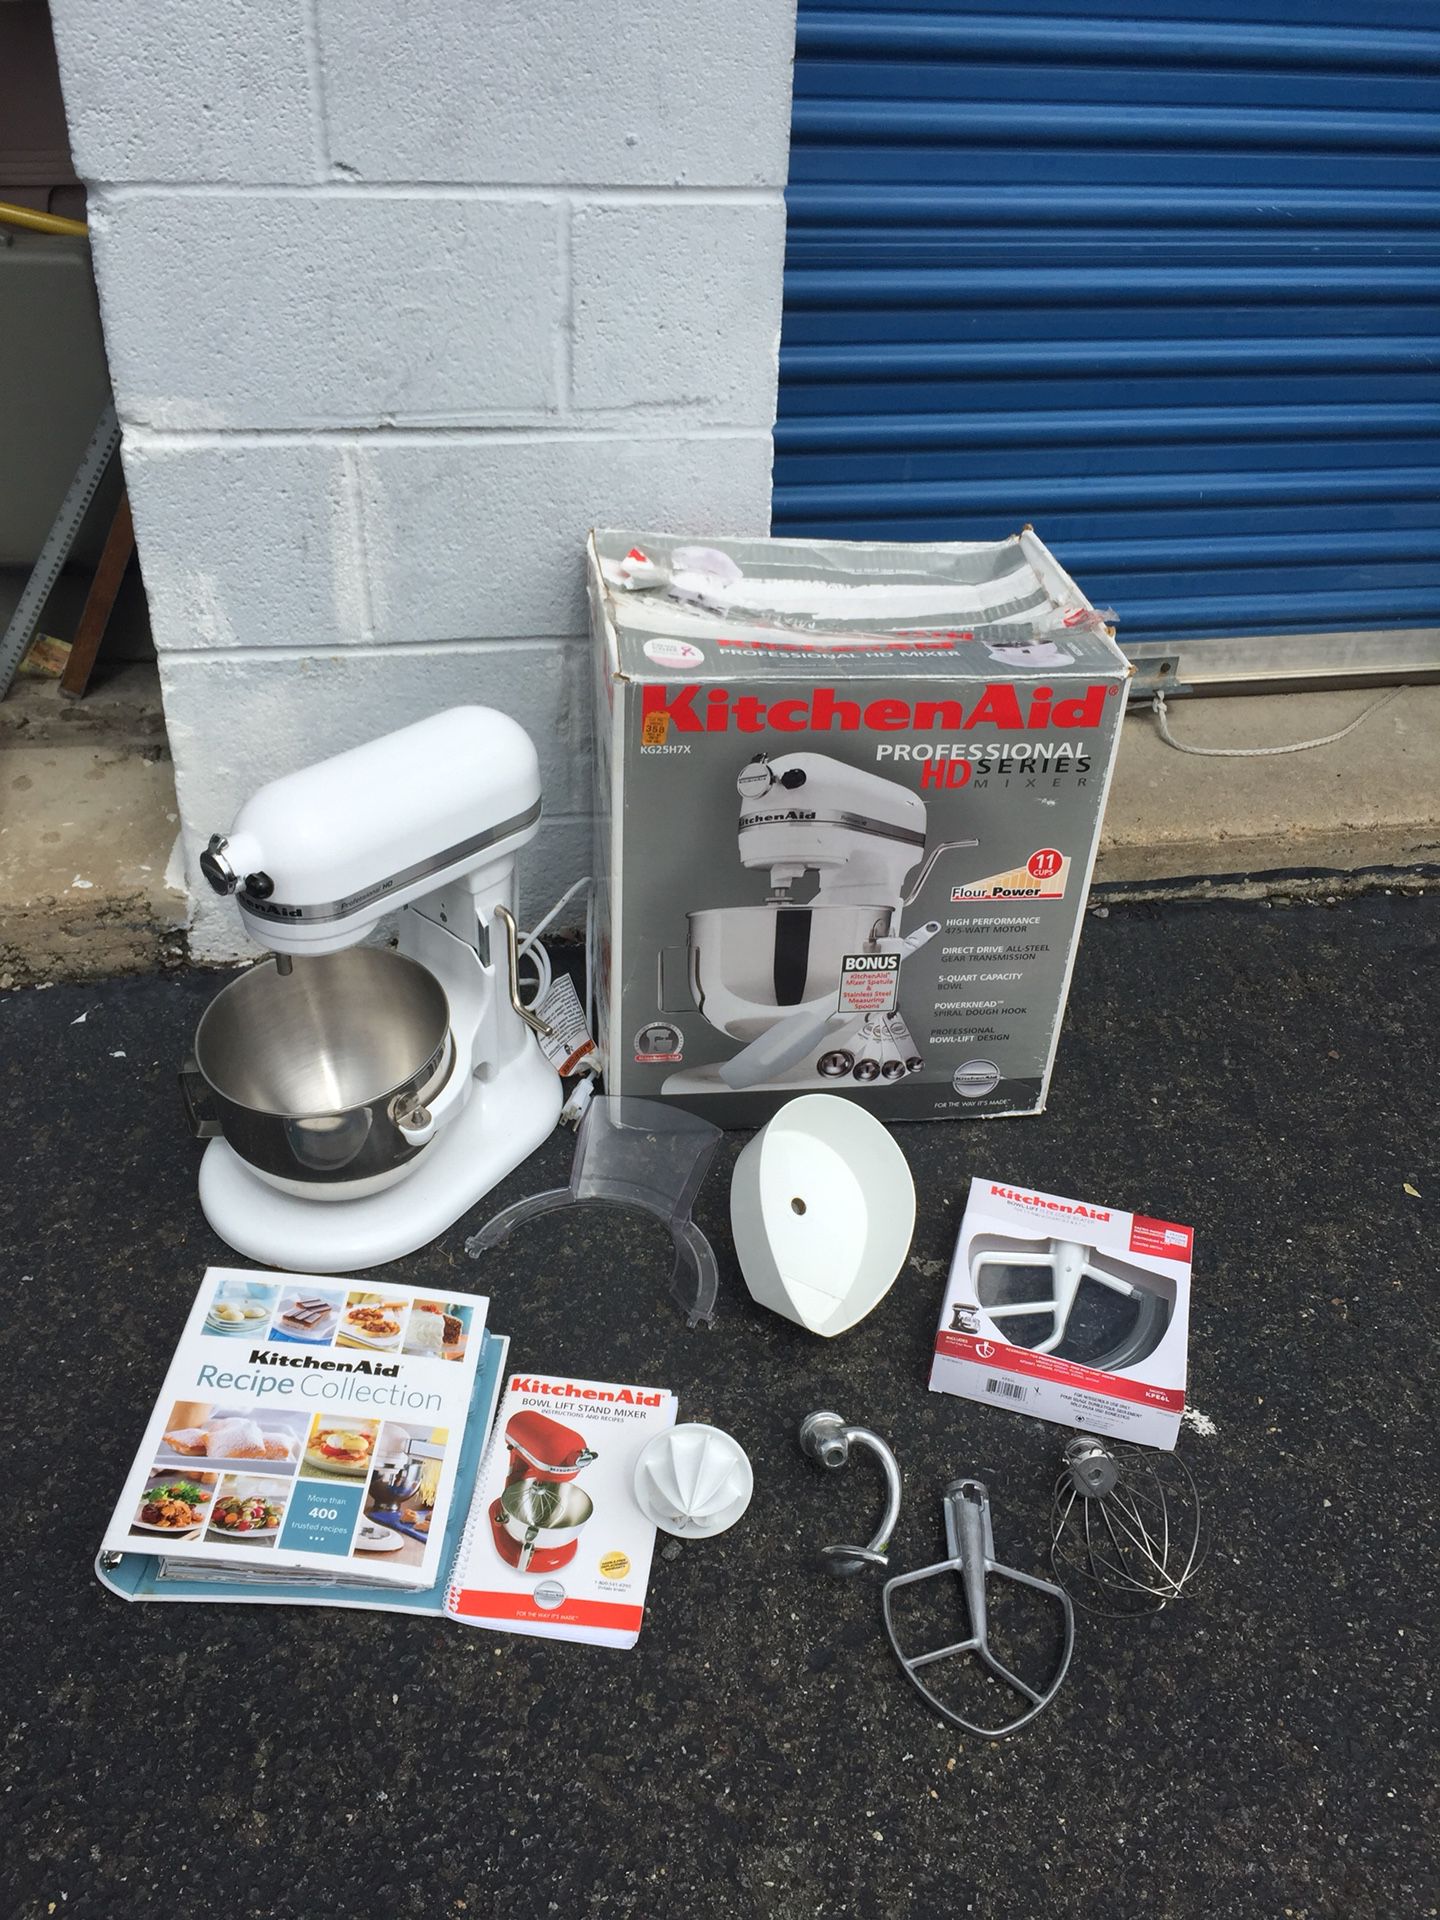 Kitchen aid professional series mixer with accessories